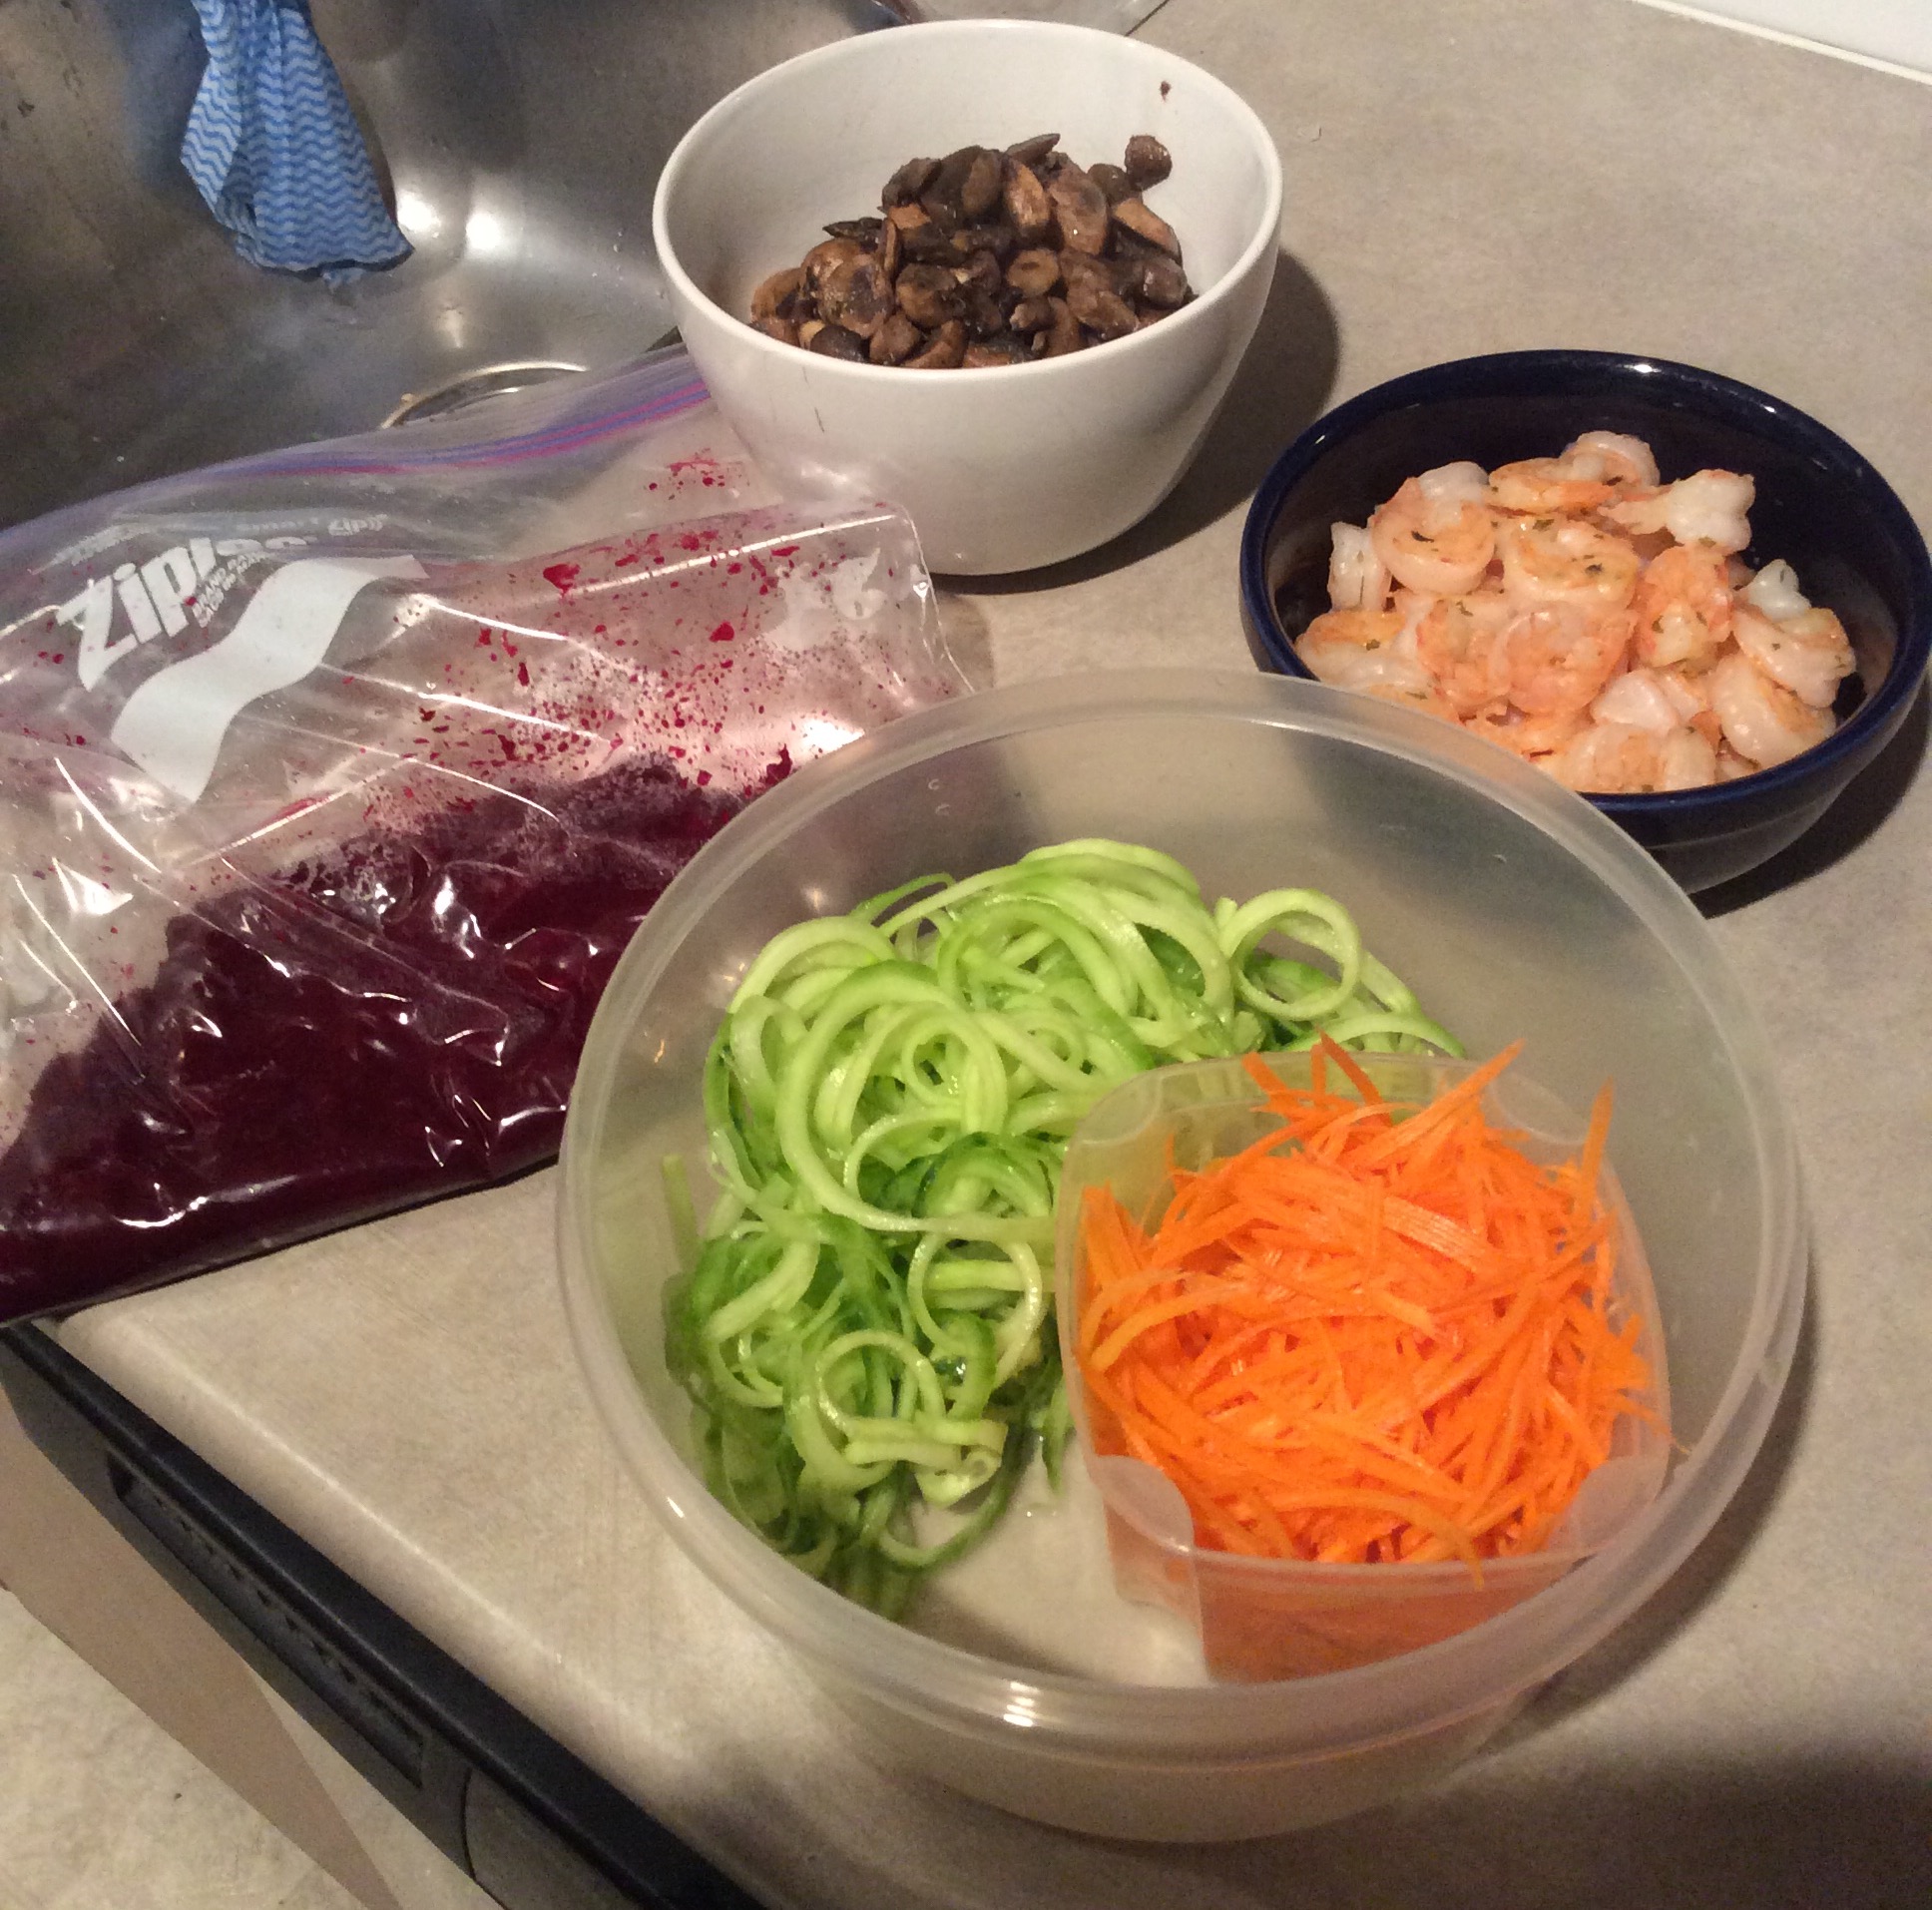 Picture of sauteed mushrooms, garlic shrimp, pureed beets and spiralized cucumbers and julienned carrots